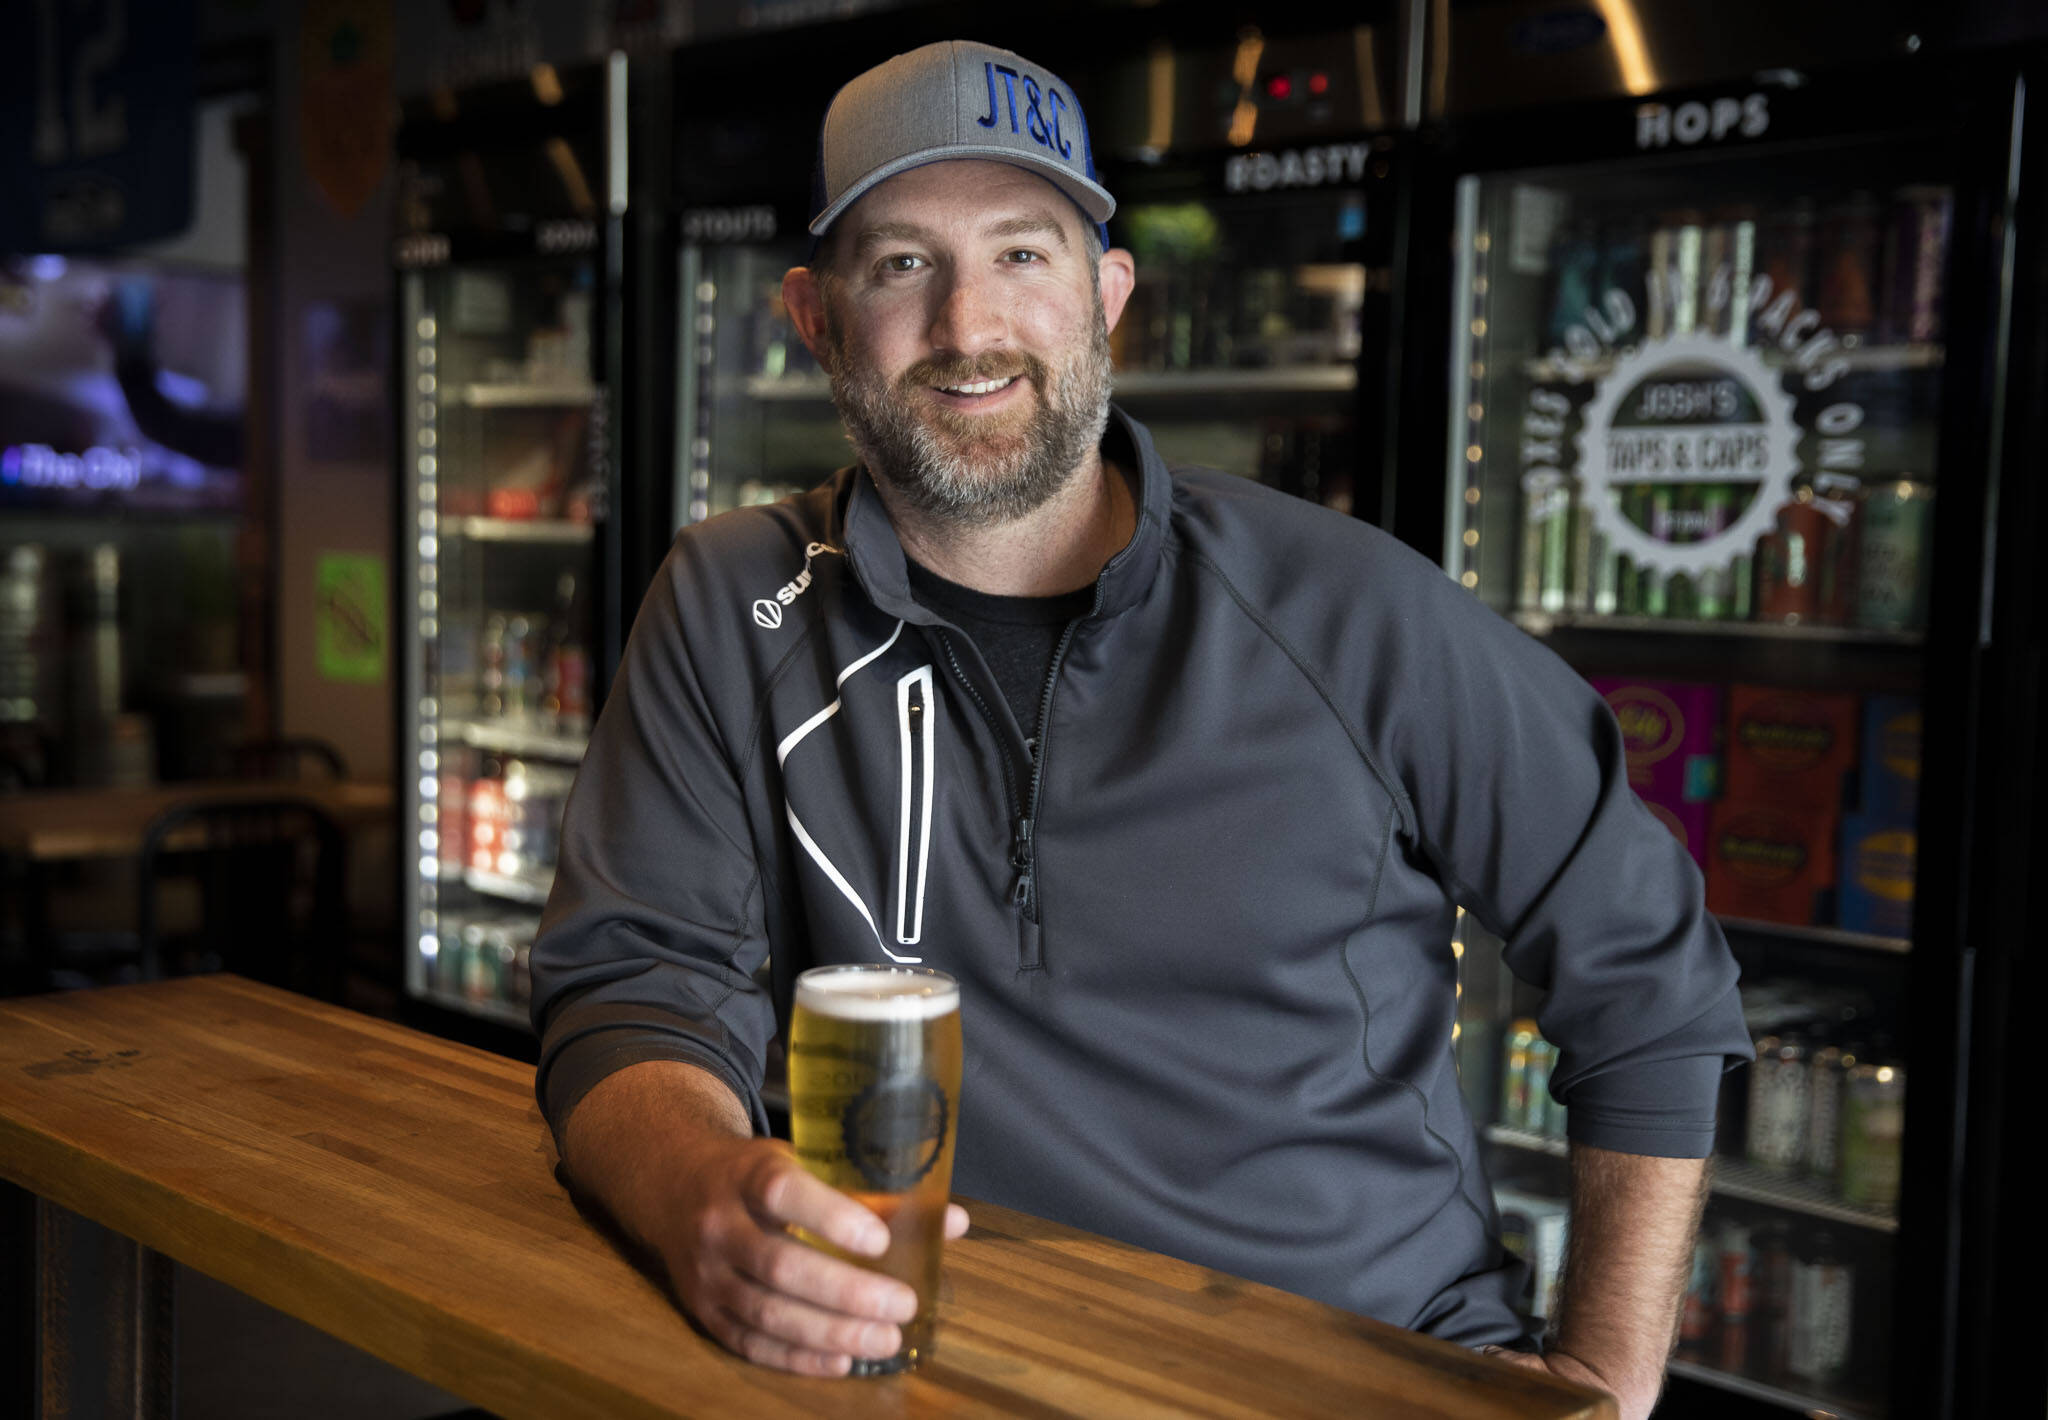 Josh Arnold, owner of Josh’s Taps Caps in Snohomish, relaxes with a glass of his Wayfinder Party Time Pilsner. (Olivia Vanni / The Herald)